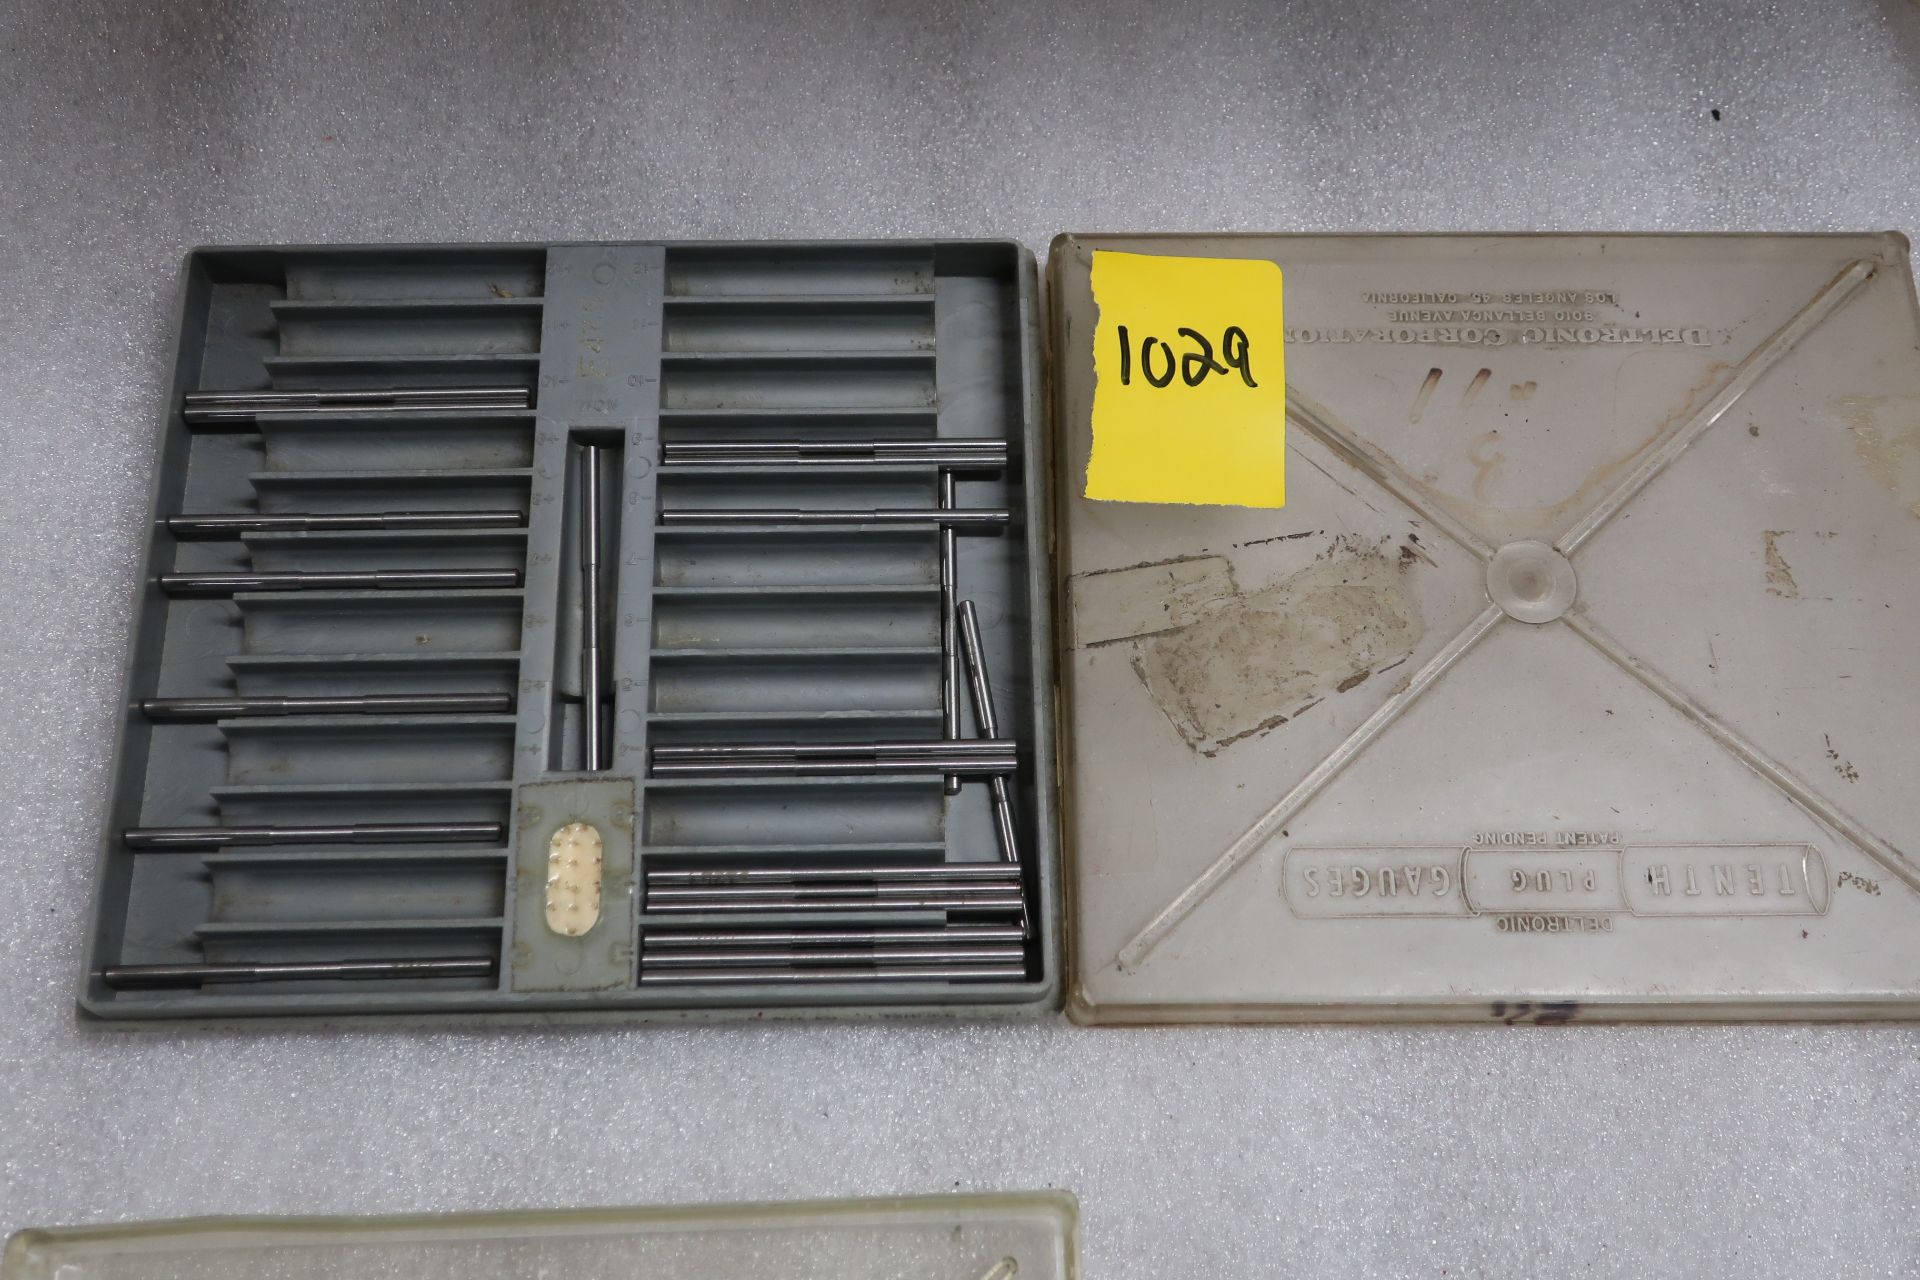 Lot of 5 (5 units) Boice Gauge Precision Stand units - Image 3 of 3